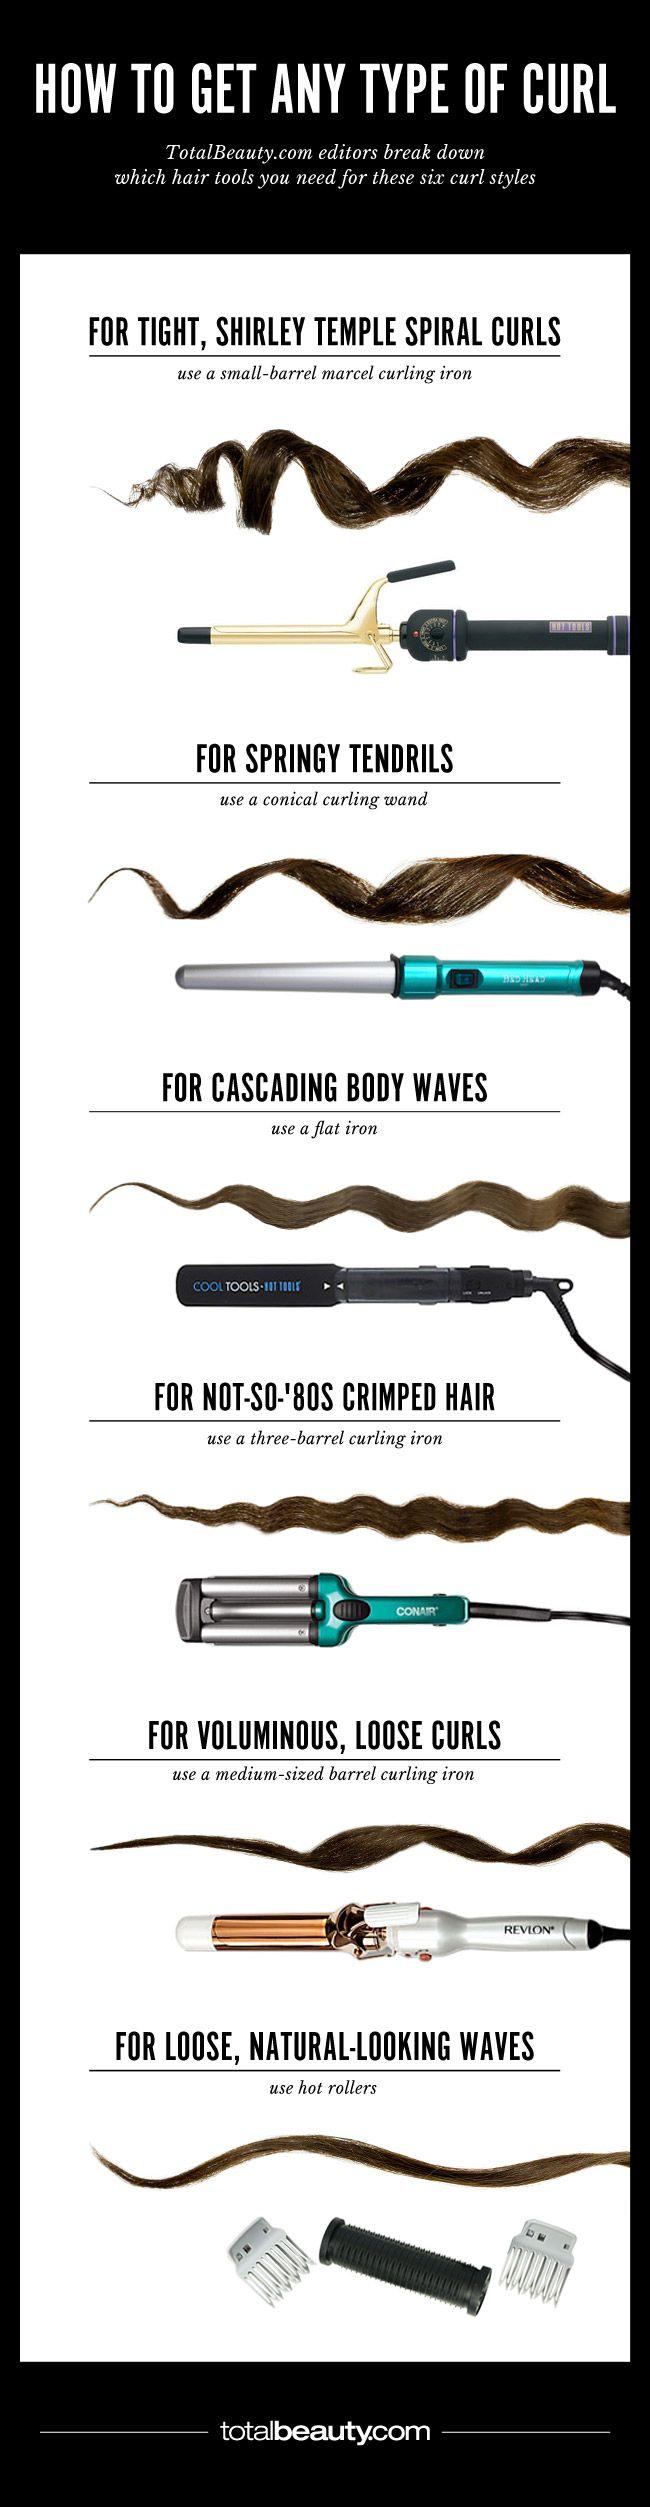 Wedding - The Curling Tools You Need To Get Every Type Of Curl